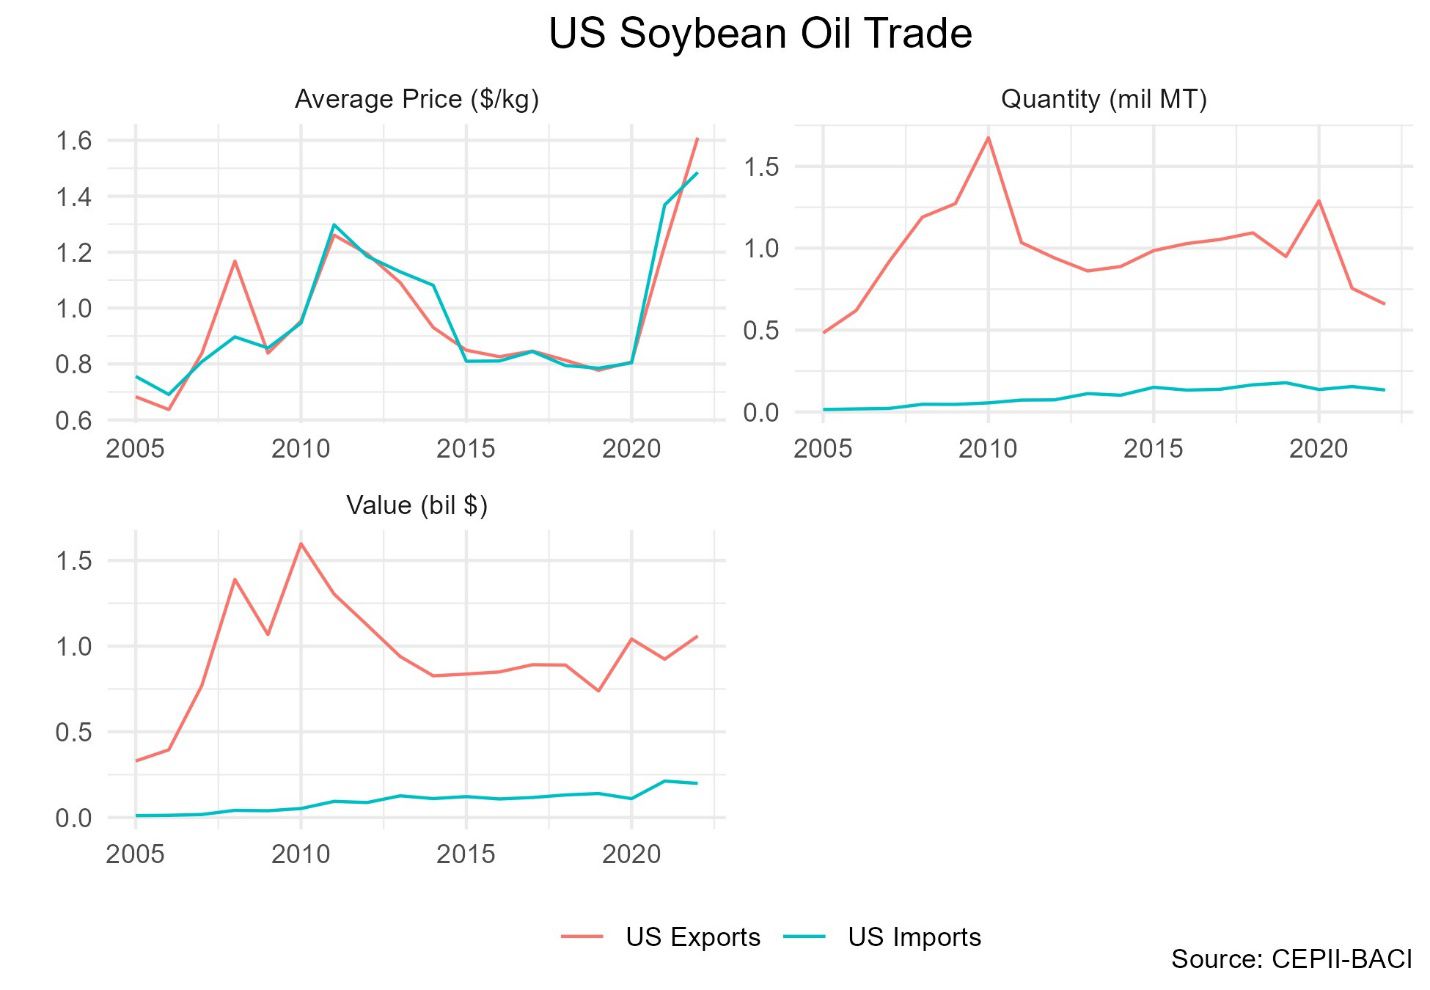 3 graphs of US soybean oil's average price, quantity, and value